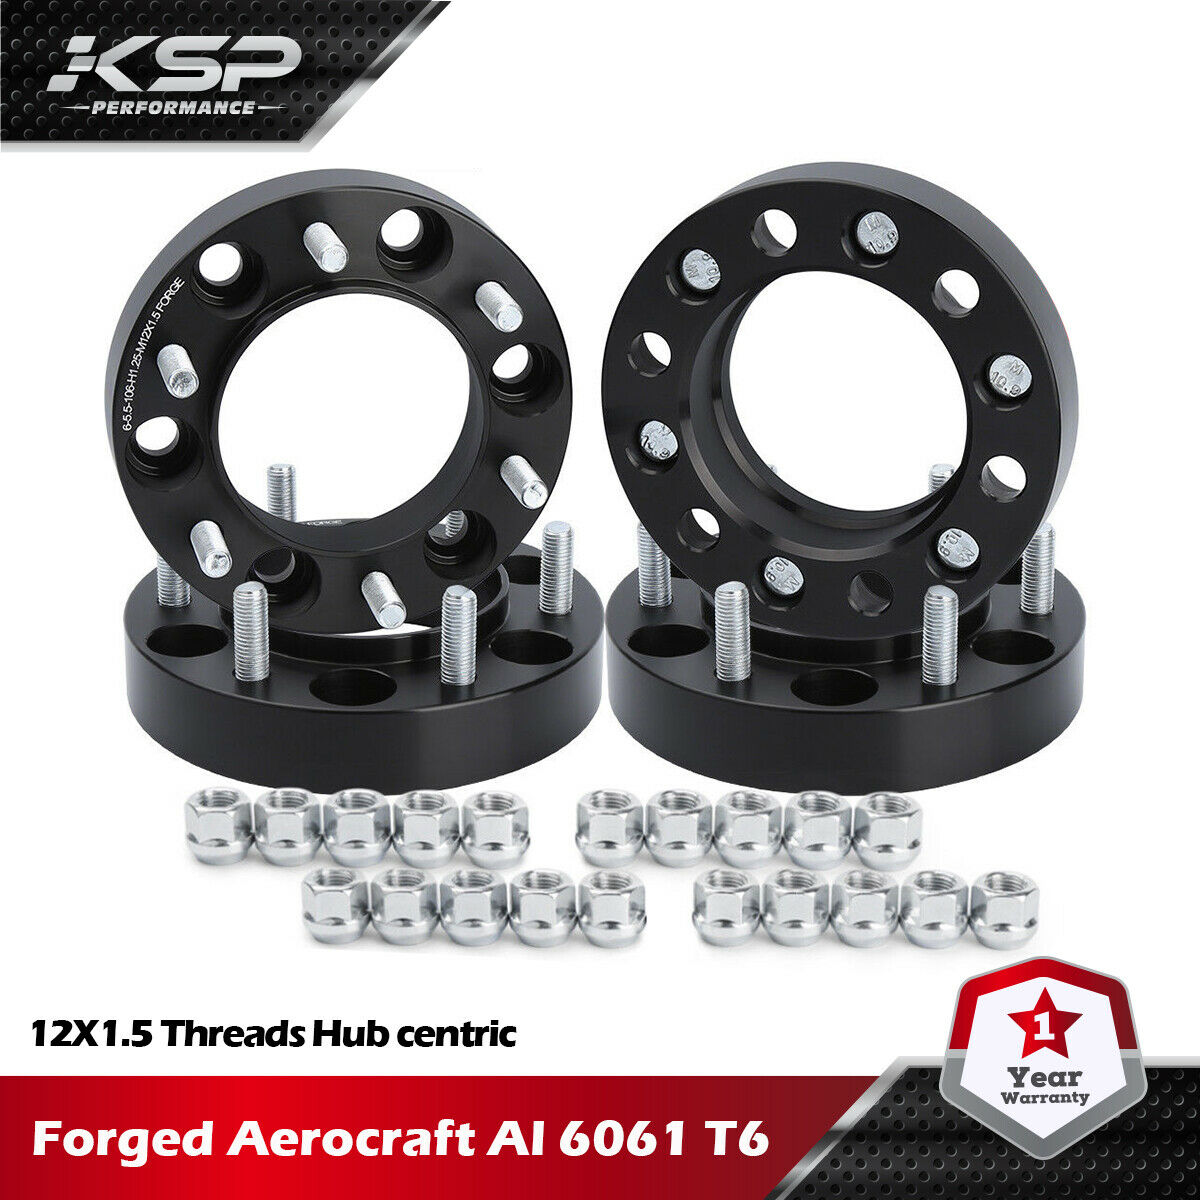 Ksp 4pc 1.25" 6x5.5 Wheel Spacers Hub Centric 6x139.7mm 106mm Fit For Tacoma Fj